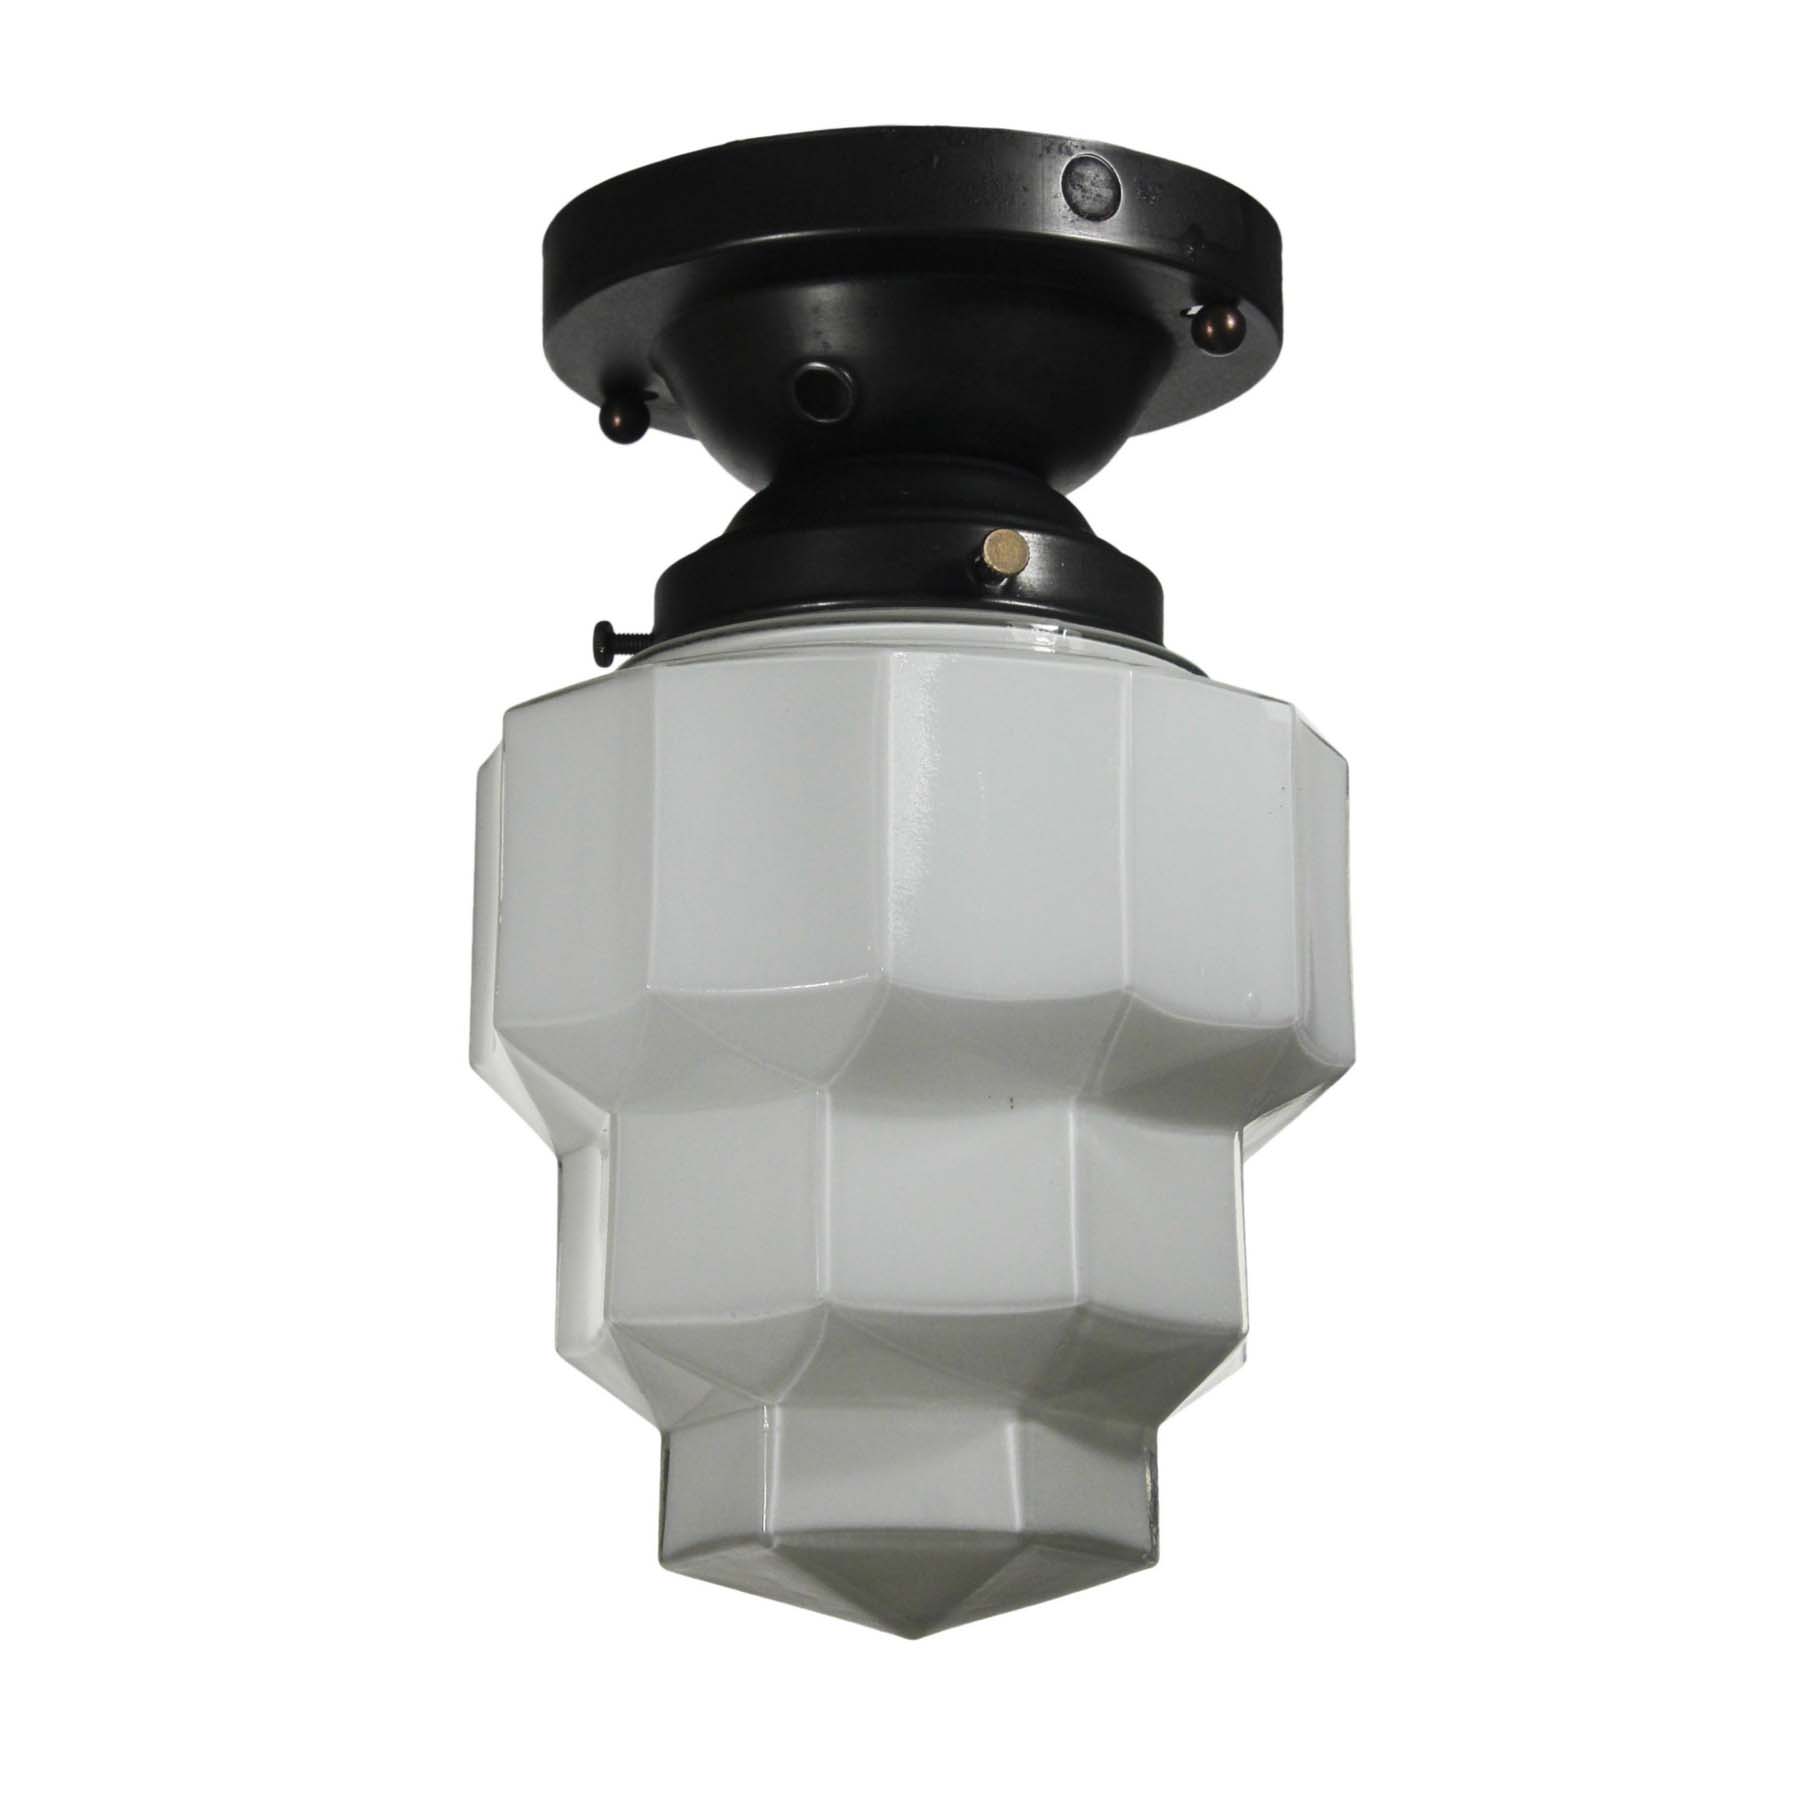 SOLD Art Deco Flush Mount with Flash Glass Shade, Antique Lighting-66977